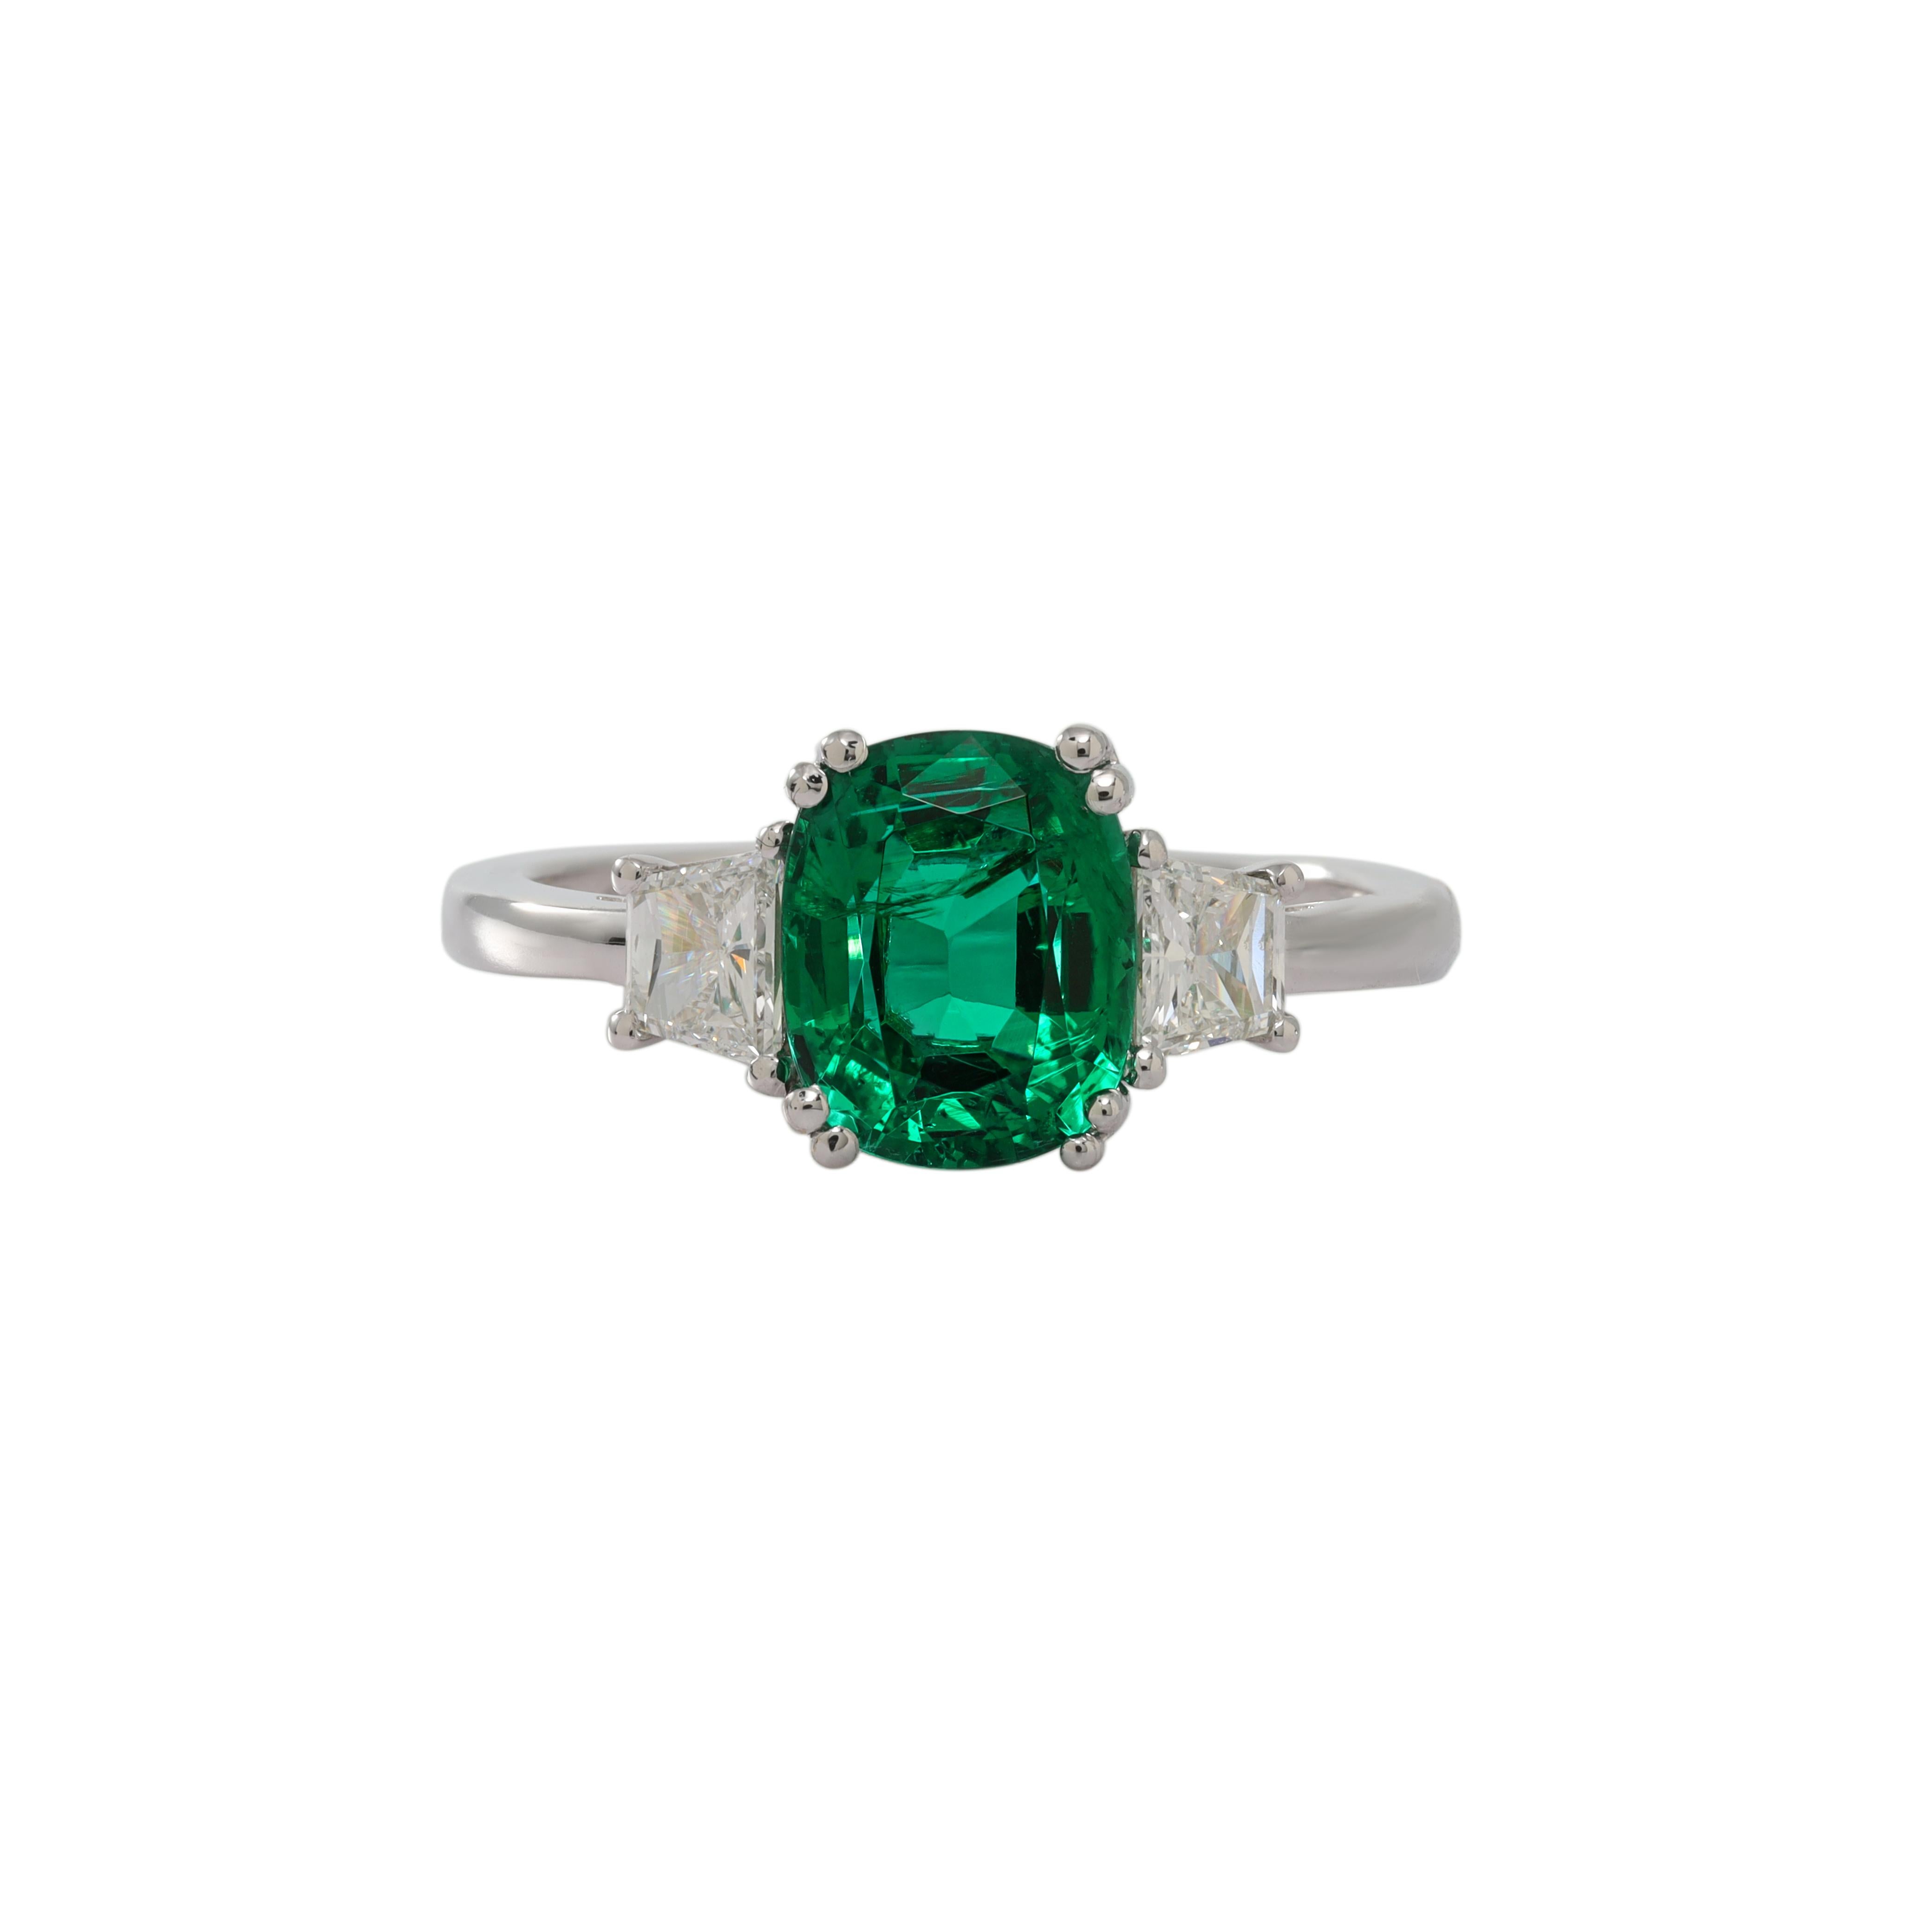 Oval Cut 18k Wg Emerald Ring with Tr. Diamond 0.57ct and Emerald 2.05ct For Sale